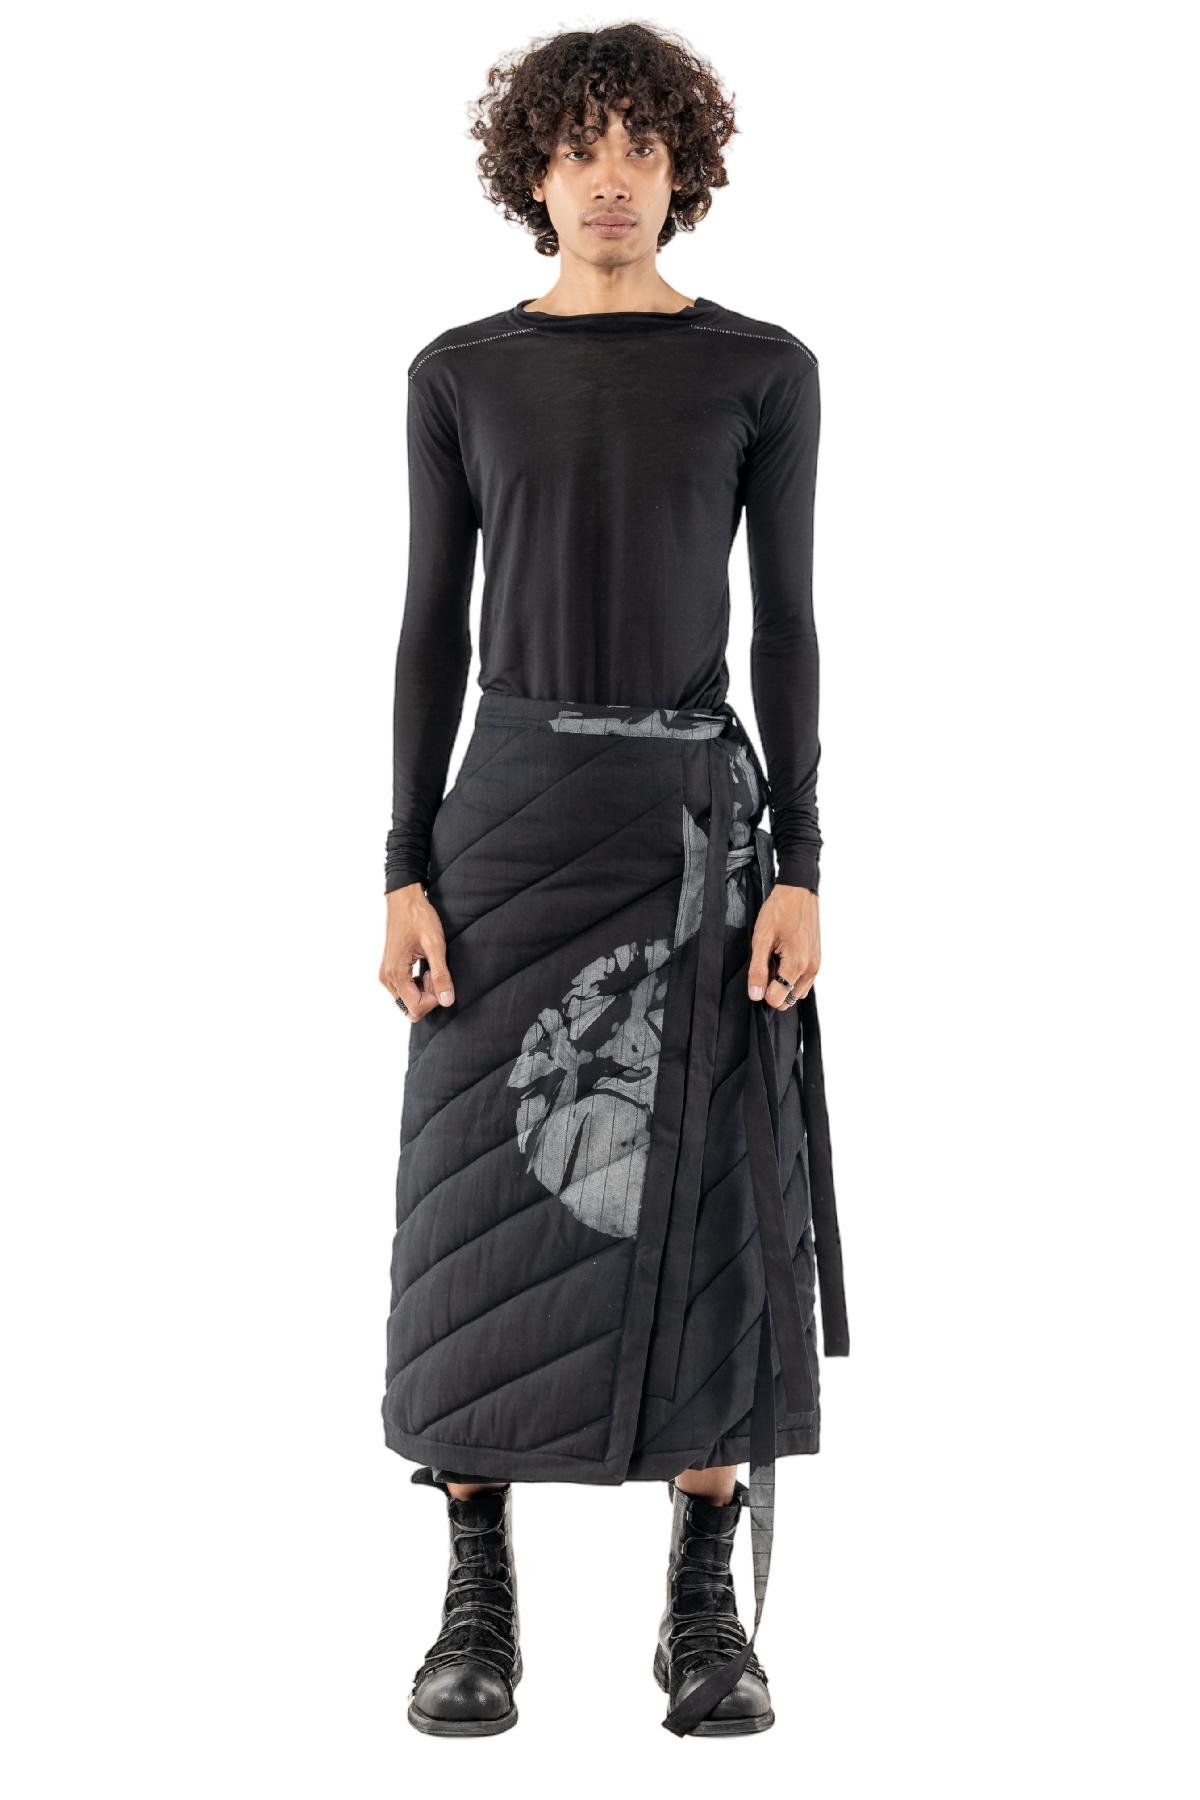 Yao Quilted Skirt by MARK BAIGENT